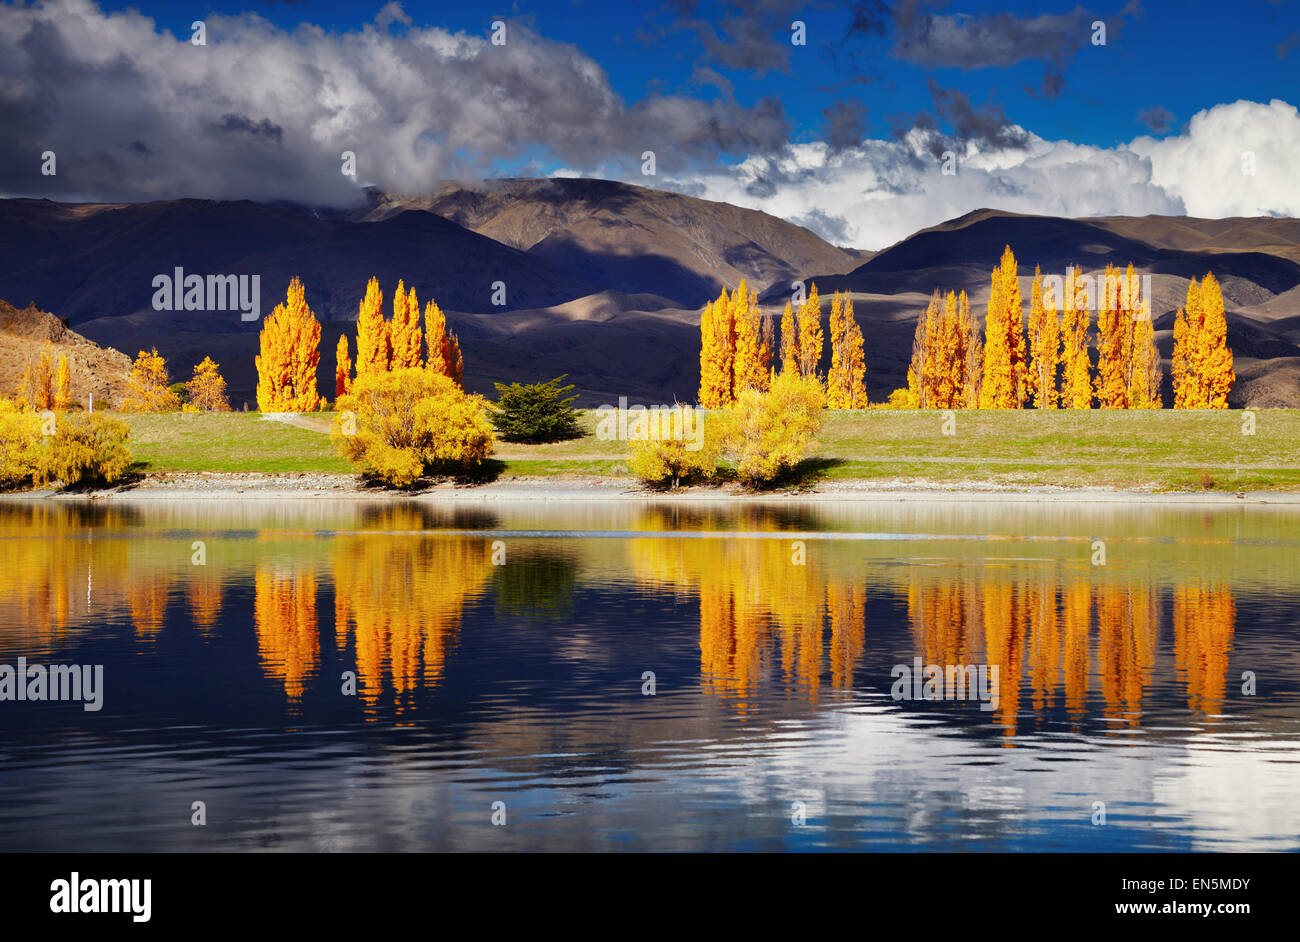 Mountain landscape in autumn colors, Lake Benmore, New Zealand Stock Photo